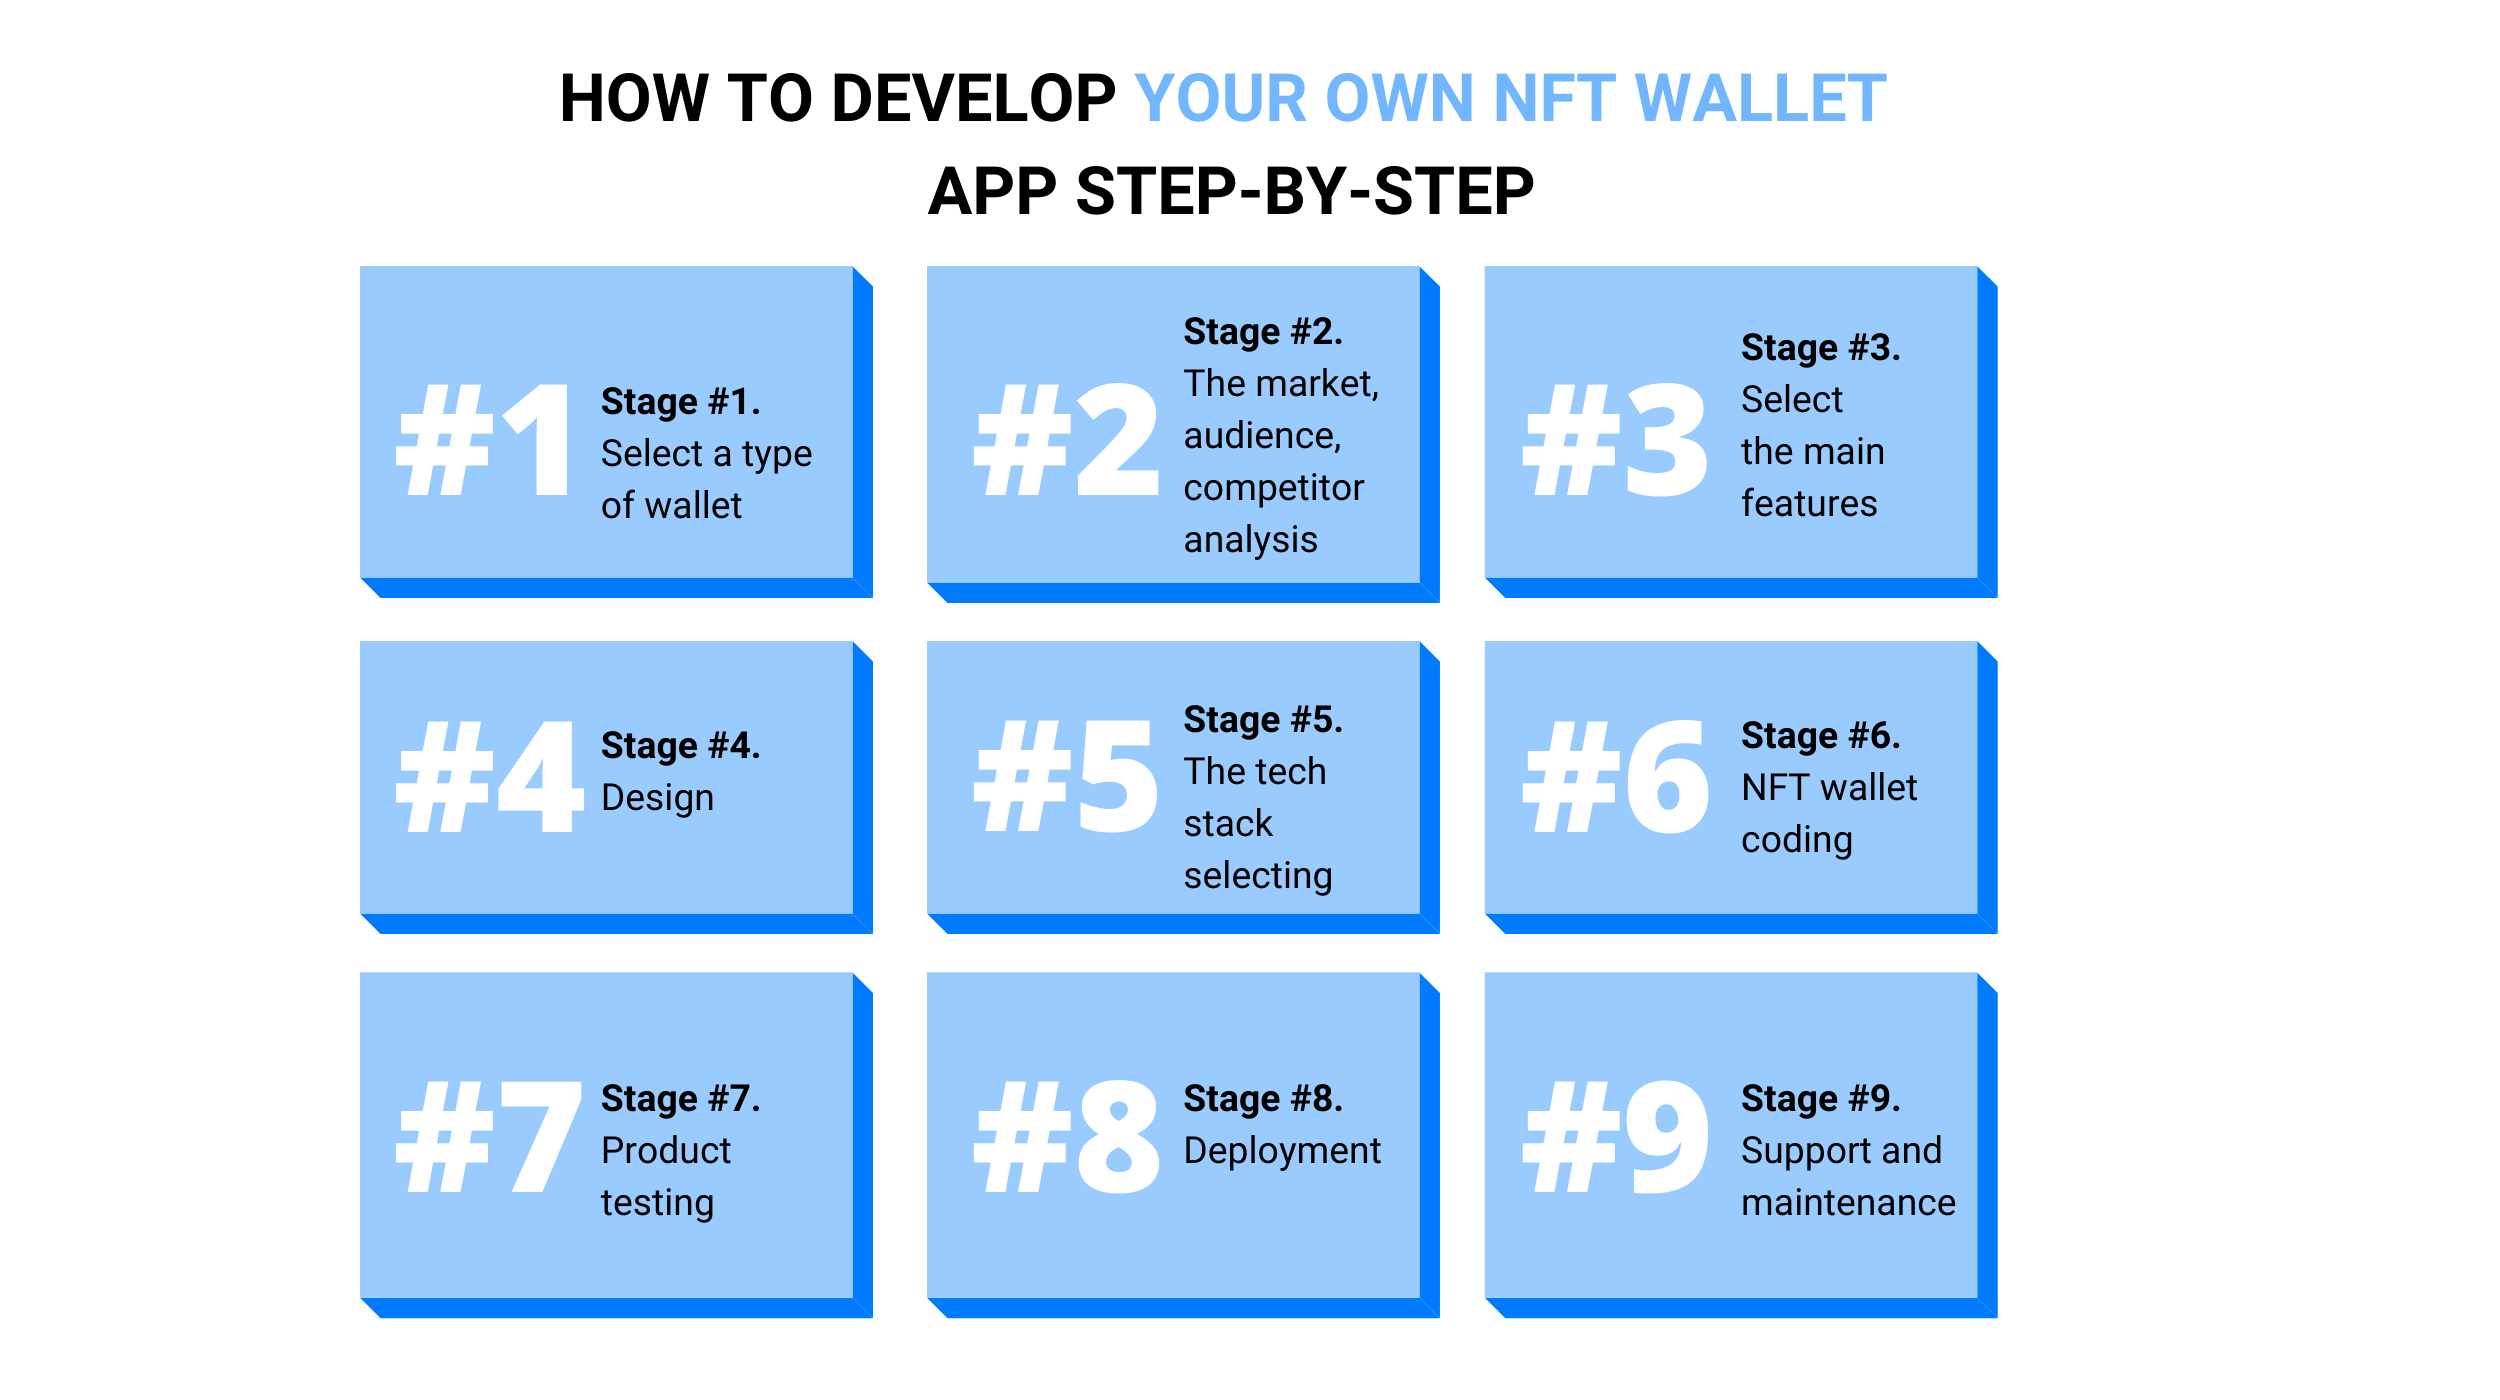 How to develop your own NFT wallet app step-by-step